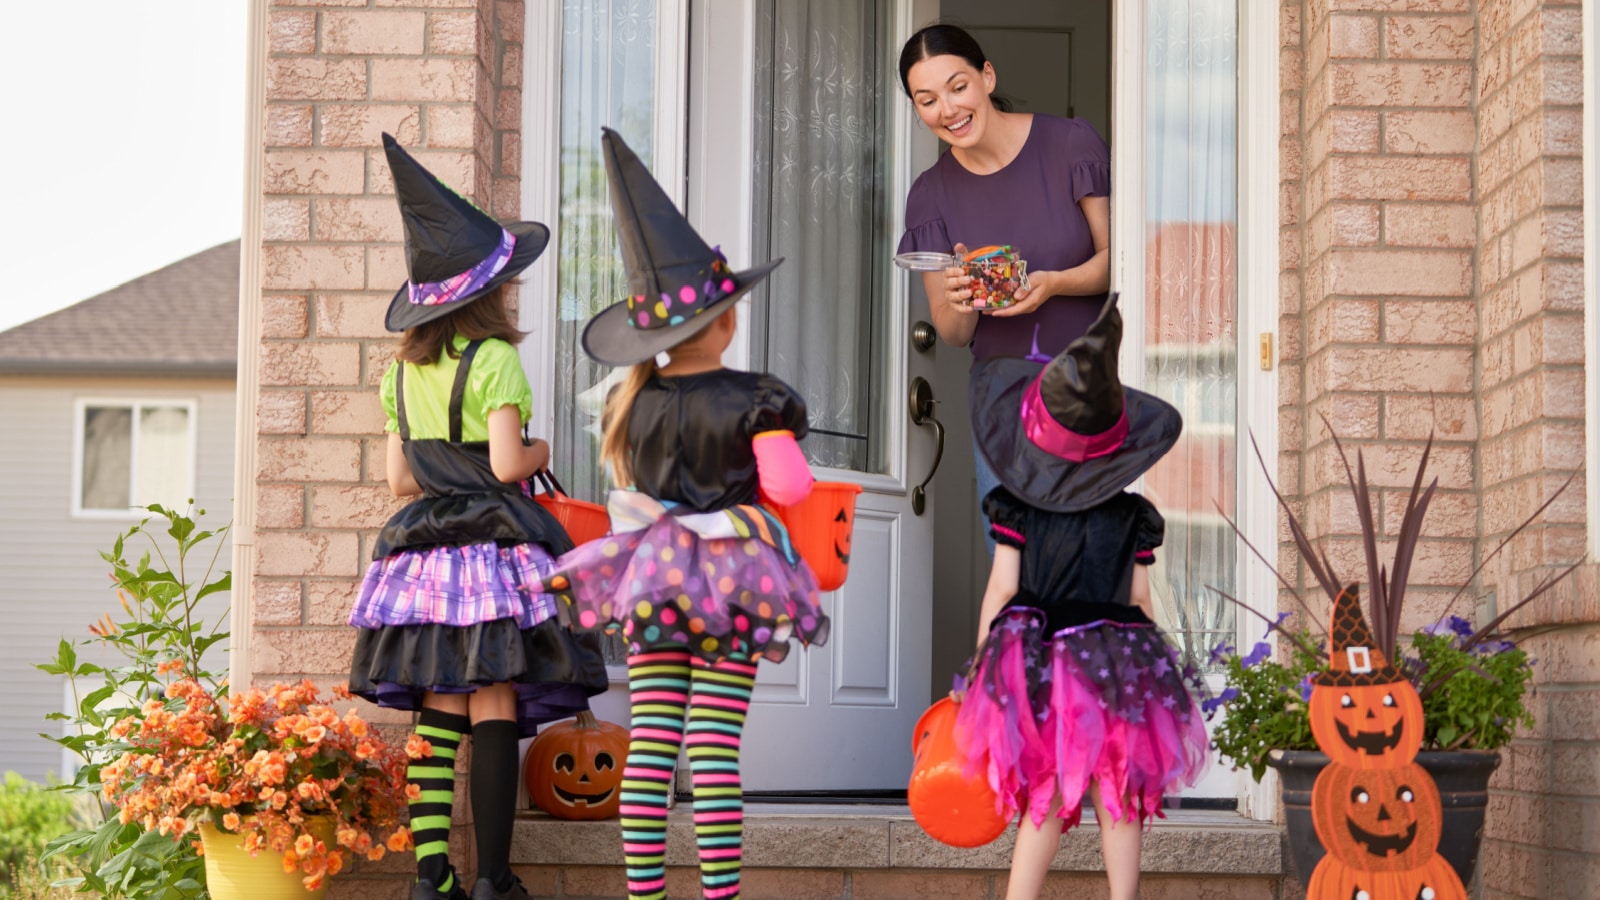 Happy family celebrating Halloween! Young mom treats children with candy. Funny kids in carnival costumes.